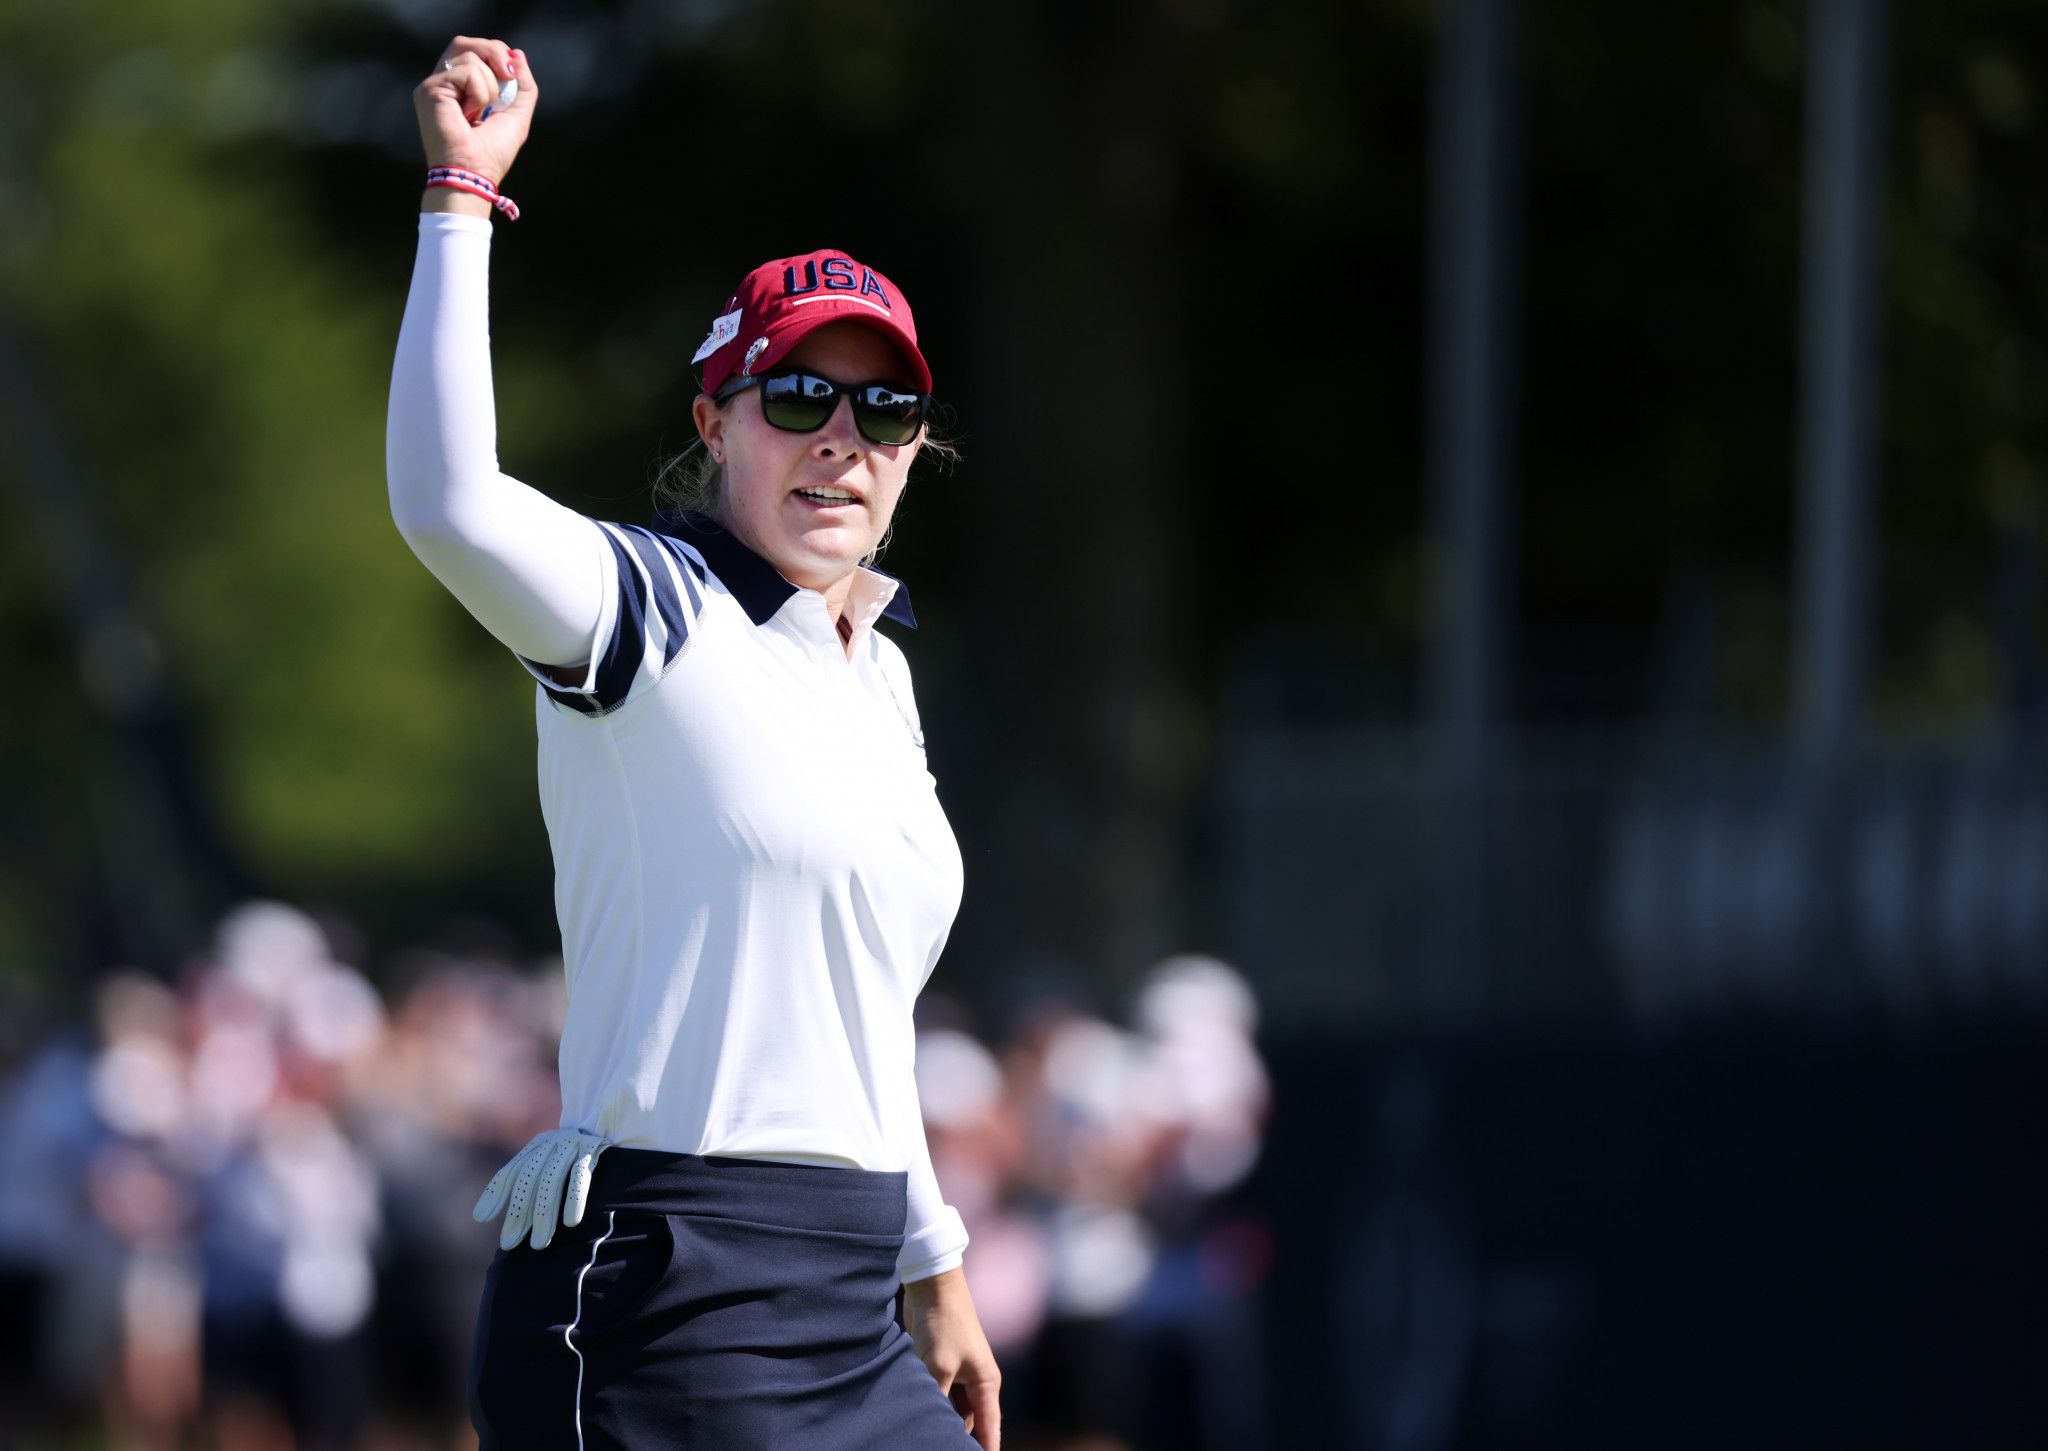 Jennifer Kupcho scored 1.5 points for the US on day two of the Solheim Cup with a win and a half in her two matches ©Getty Images